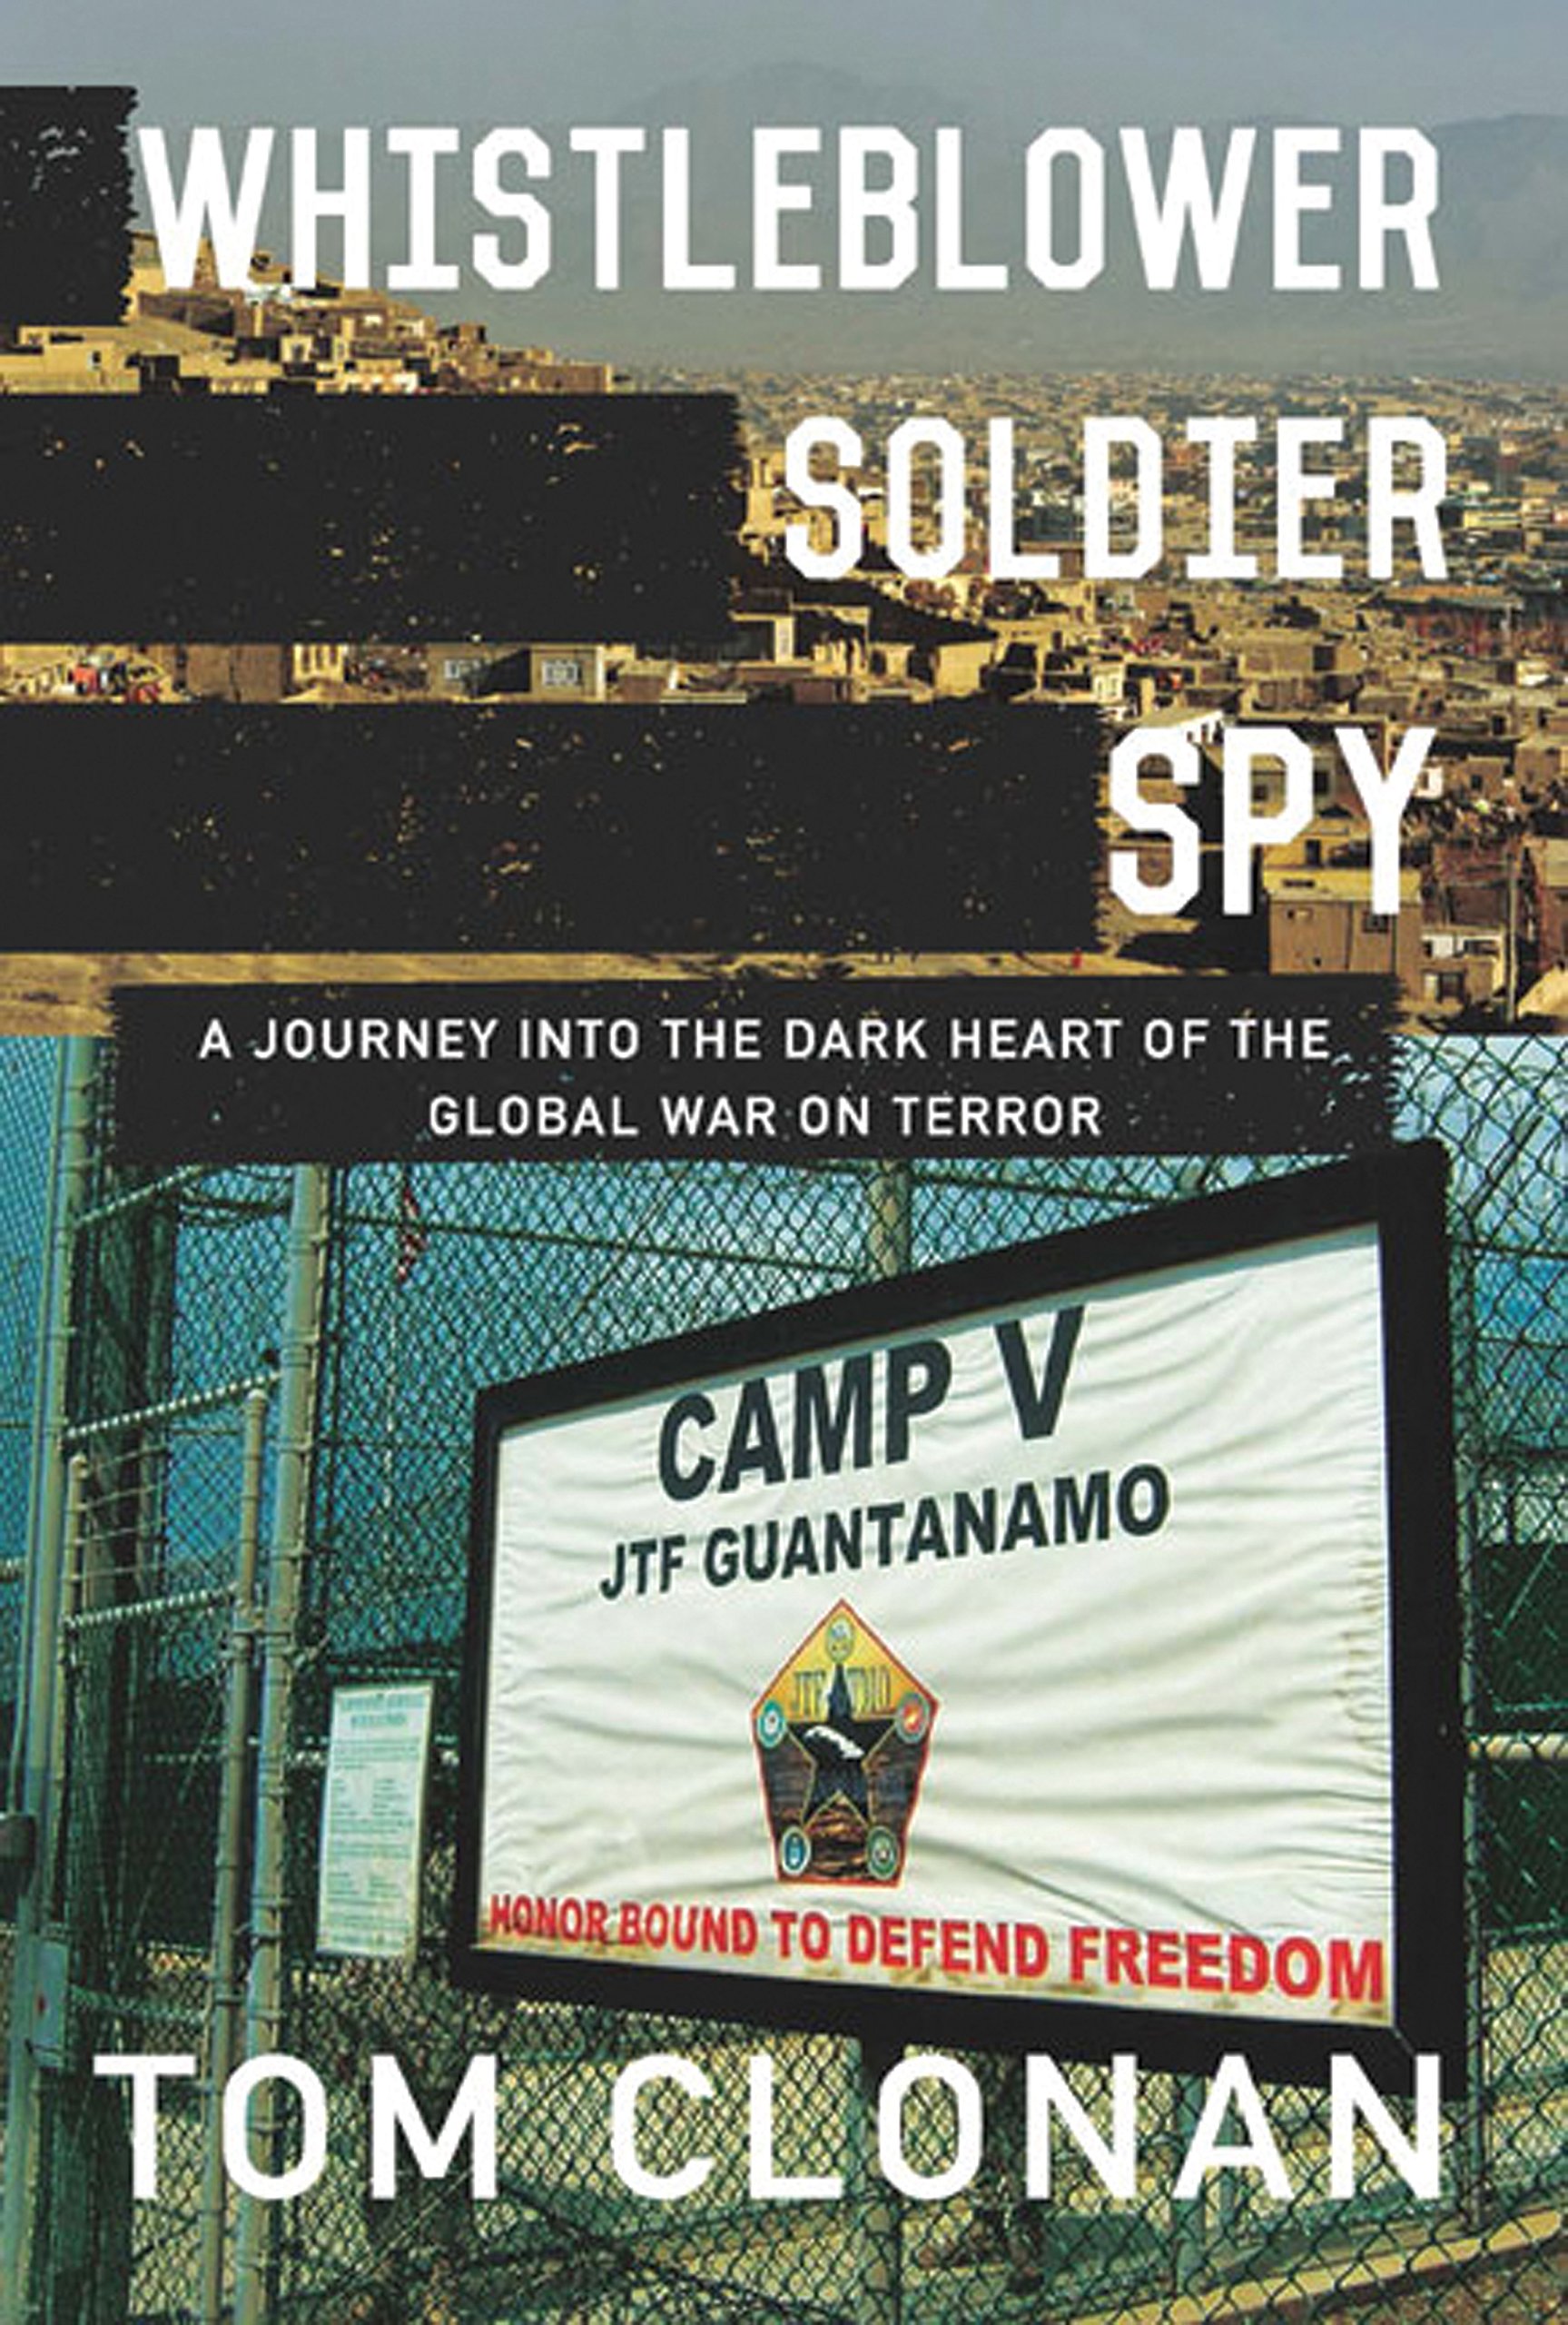 Whistleblower, Soldier, Spy: A Journey Into the Dark Heart of the Global War on Terror